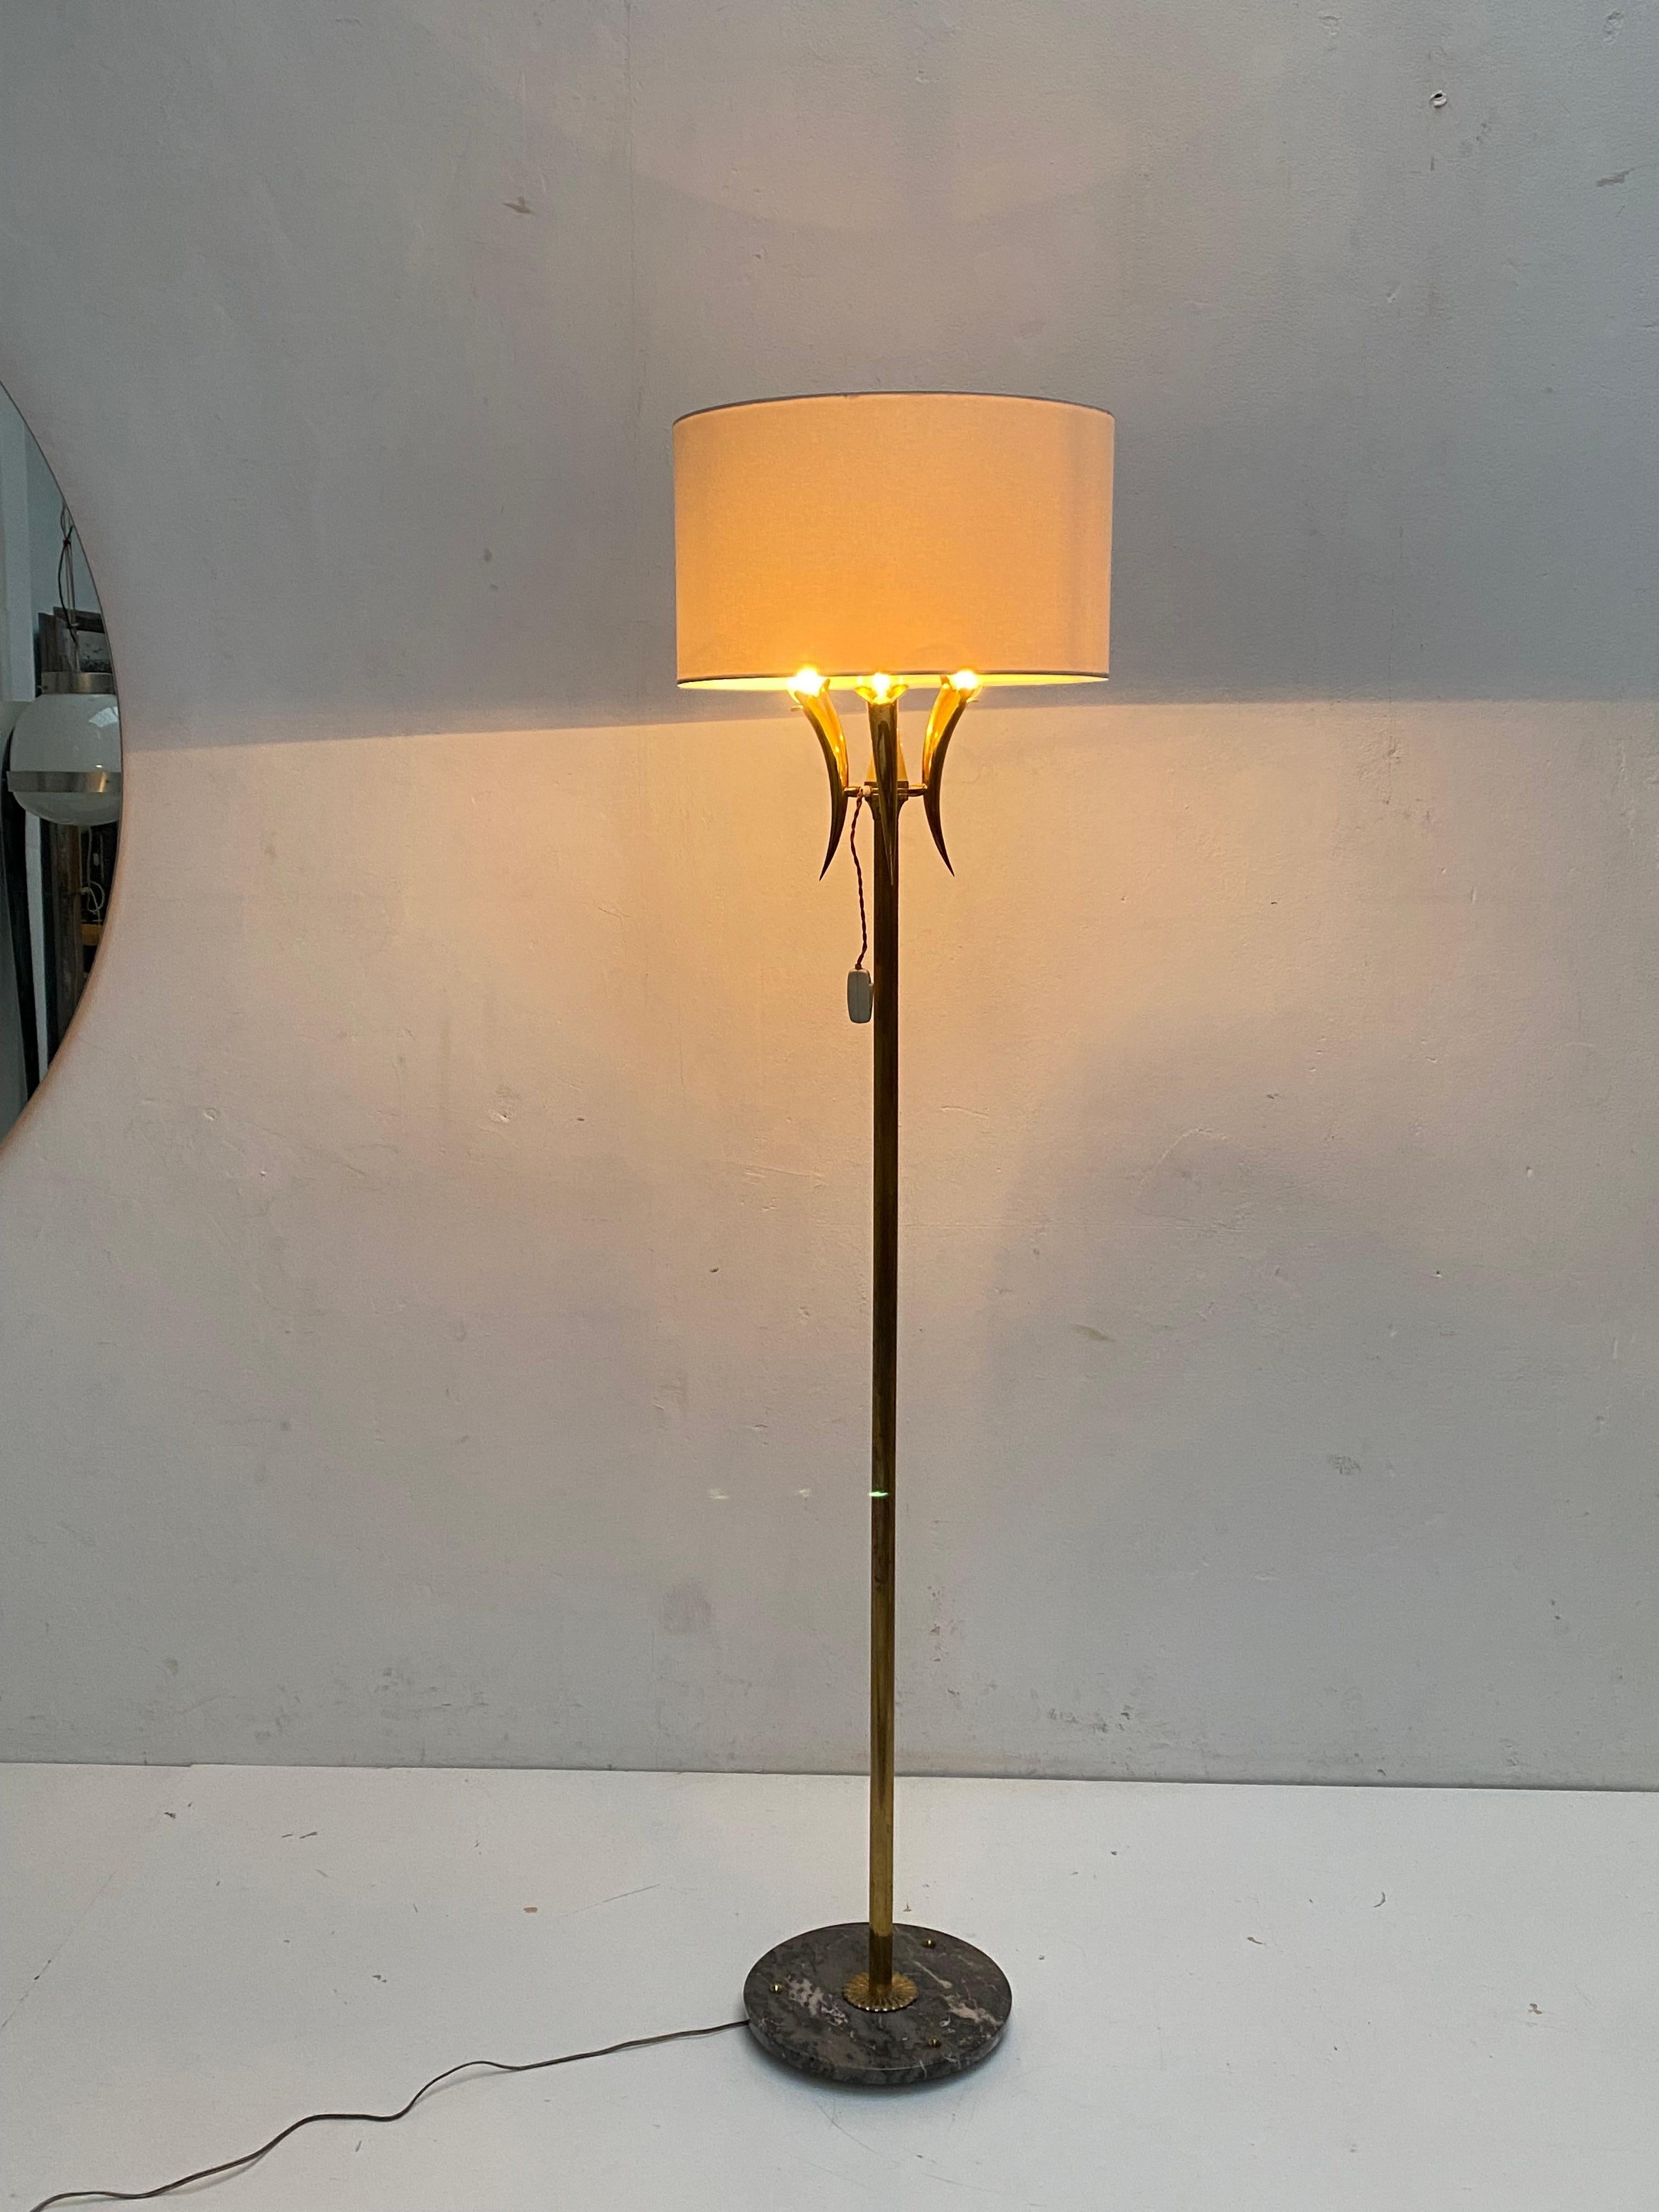 Stunning Italian Floorlamp from the 1950's

Black & Pink Carrara marble base and 3 beautiful detailed brass 'flower' bulb holders 

The lamp will be sold without the shade, a new custom matching shade would have to be made locally  

The finest